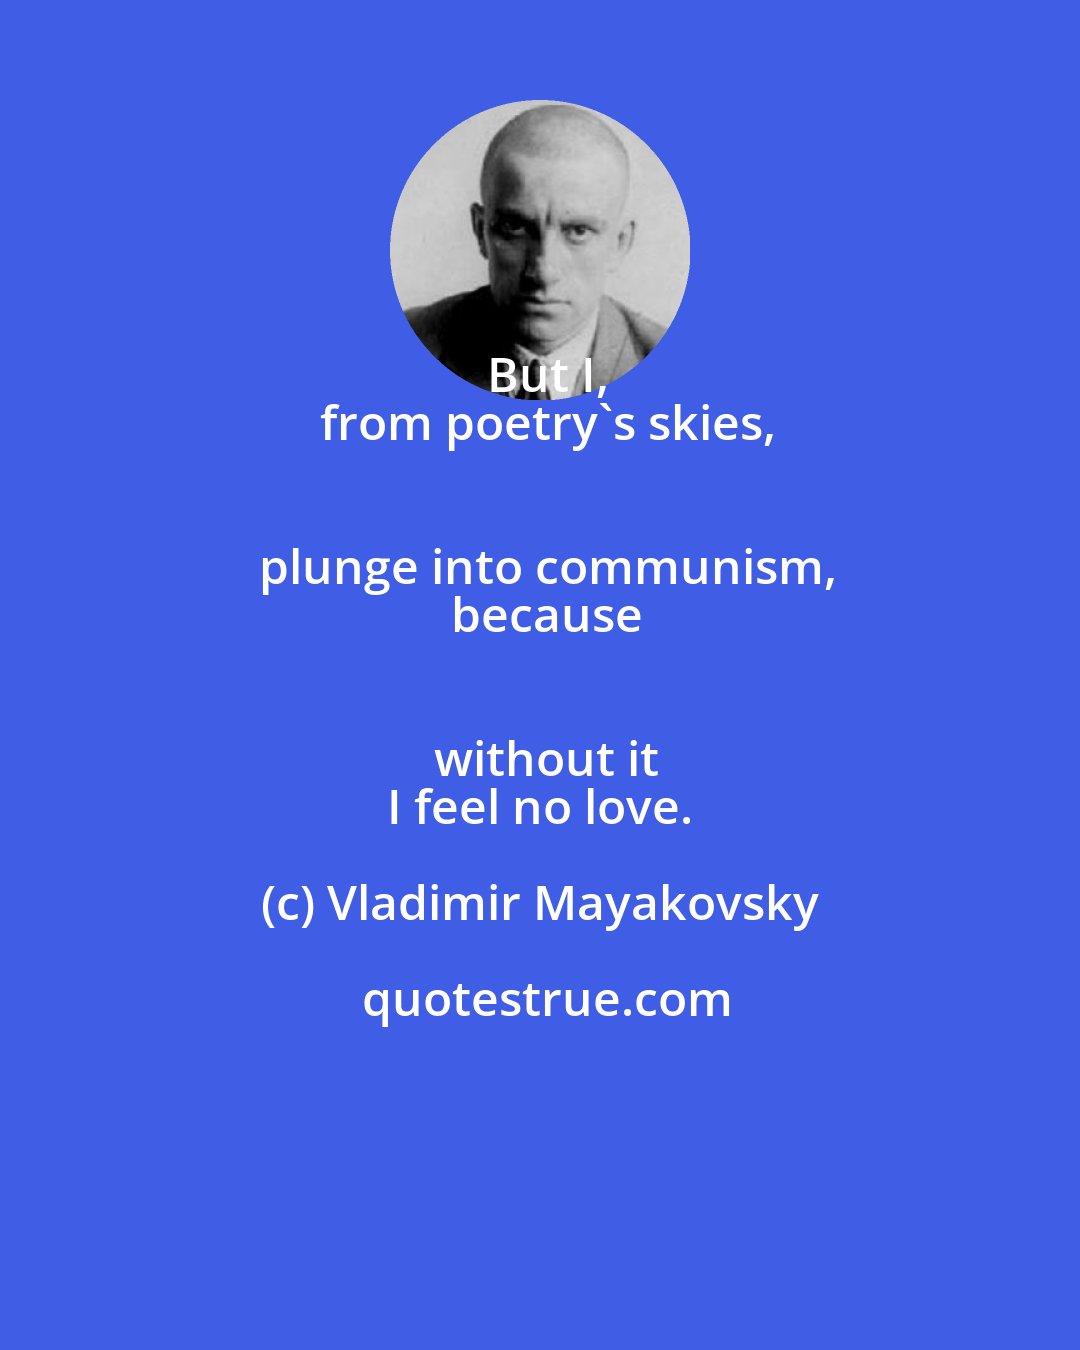 Vladimir Mayakovsky: But I,
 from poetry's skies,
 plunge into communism,
 because
 without it
 I feel no love.